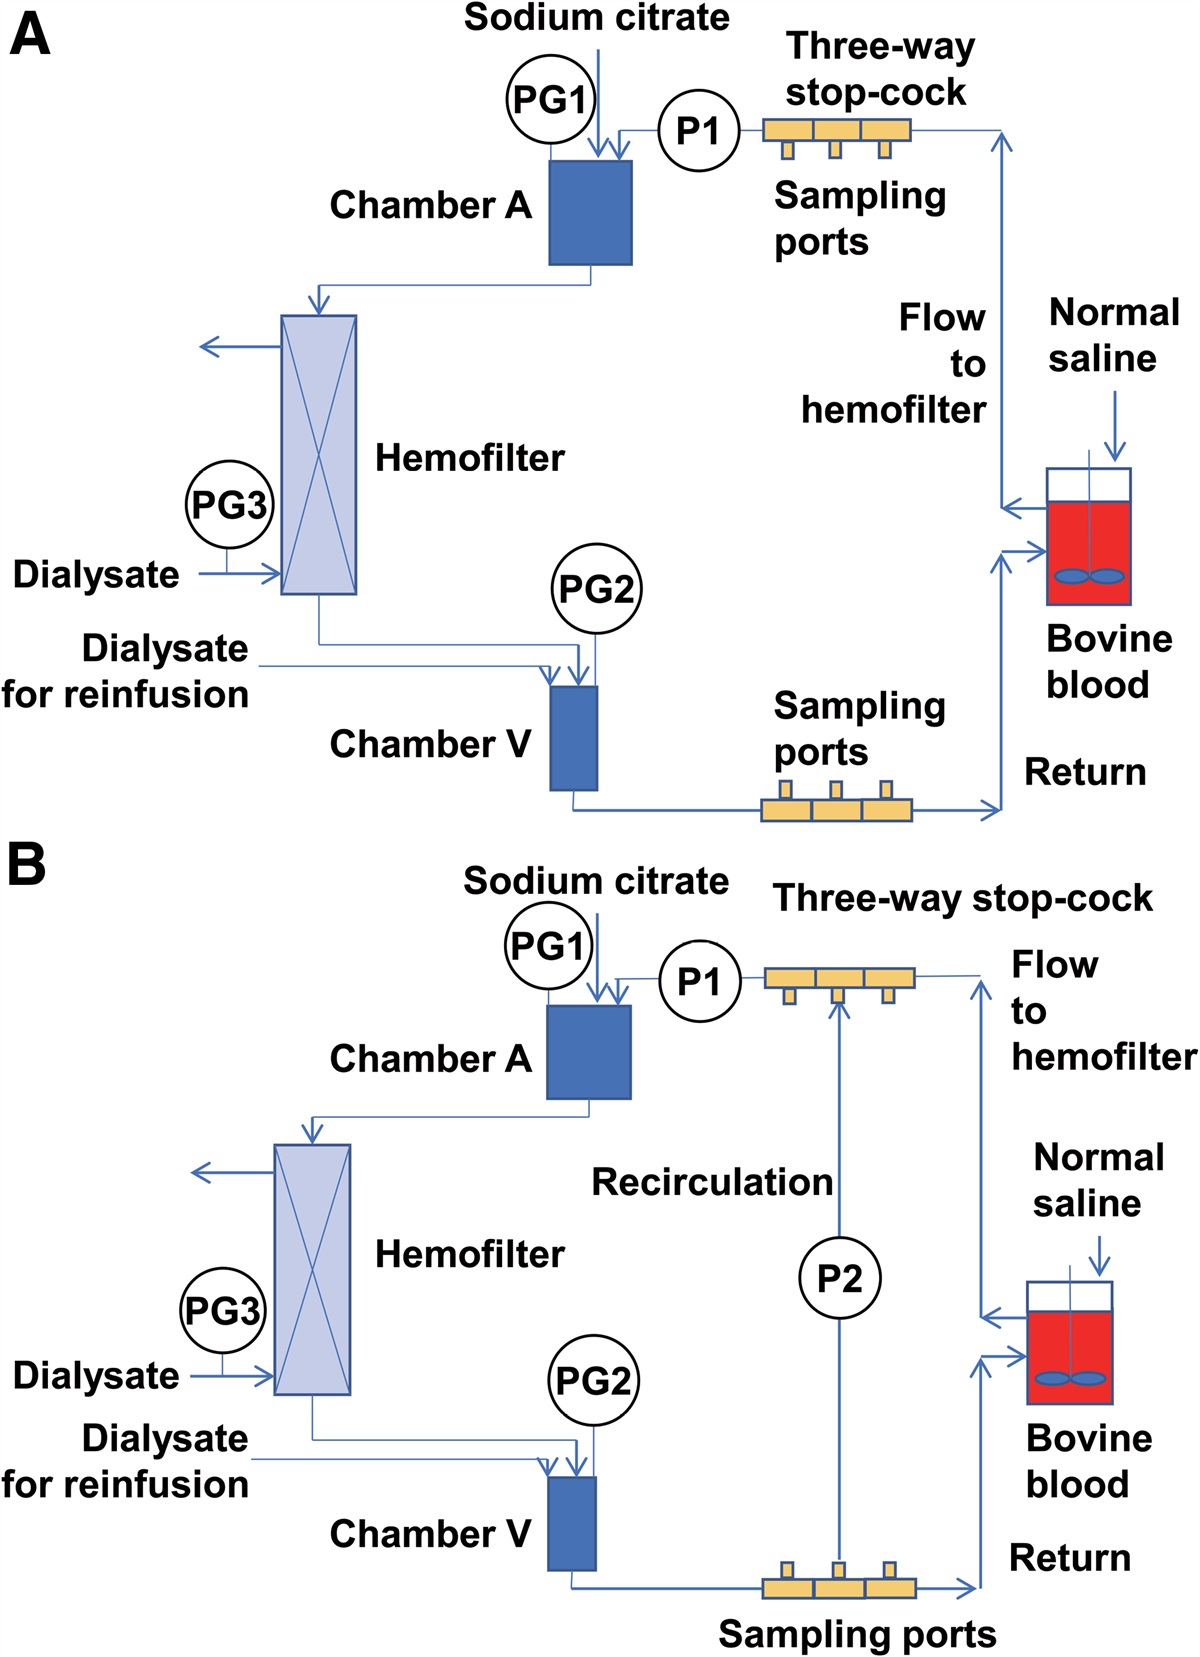 Anti-Clogging Effect of Continuous Hemodiafiltration With Blood Recirculation